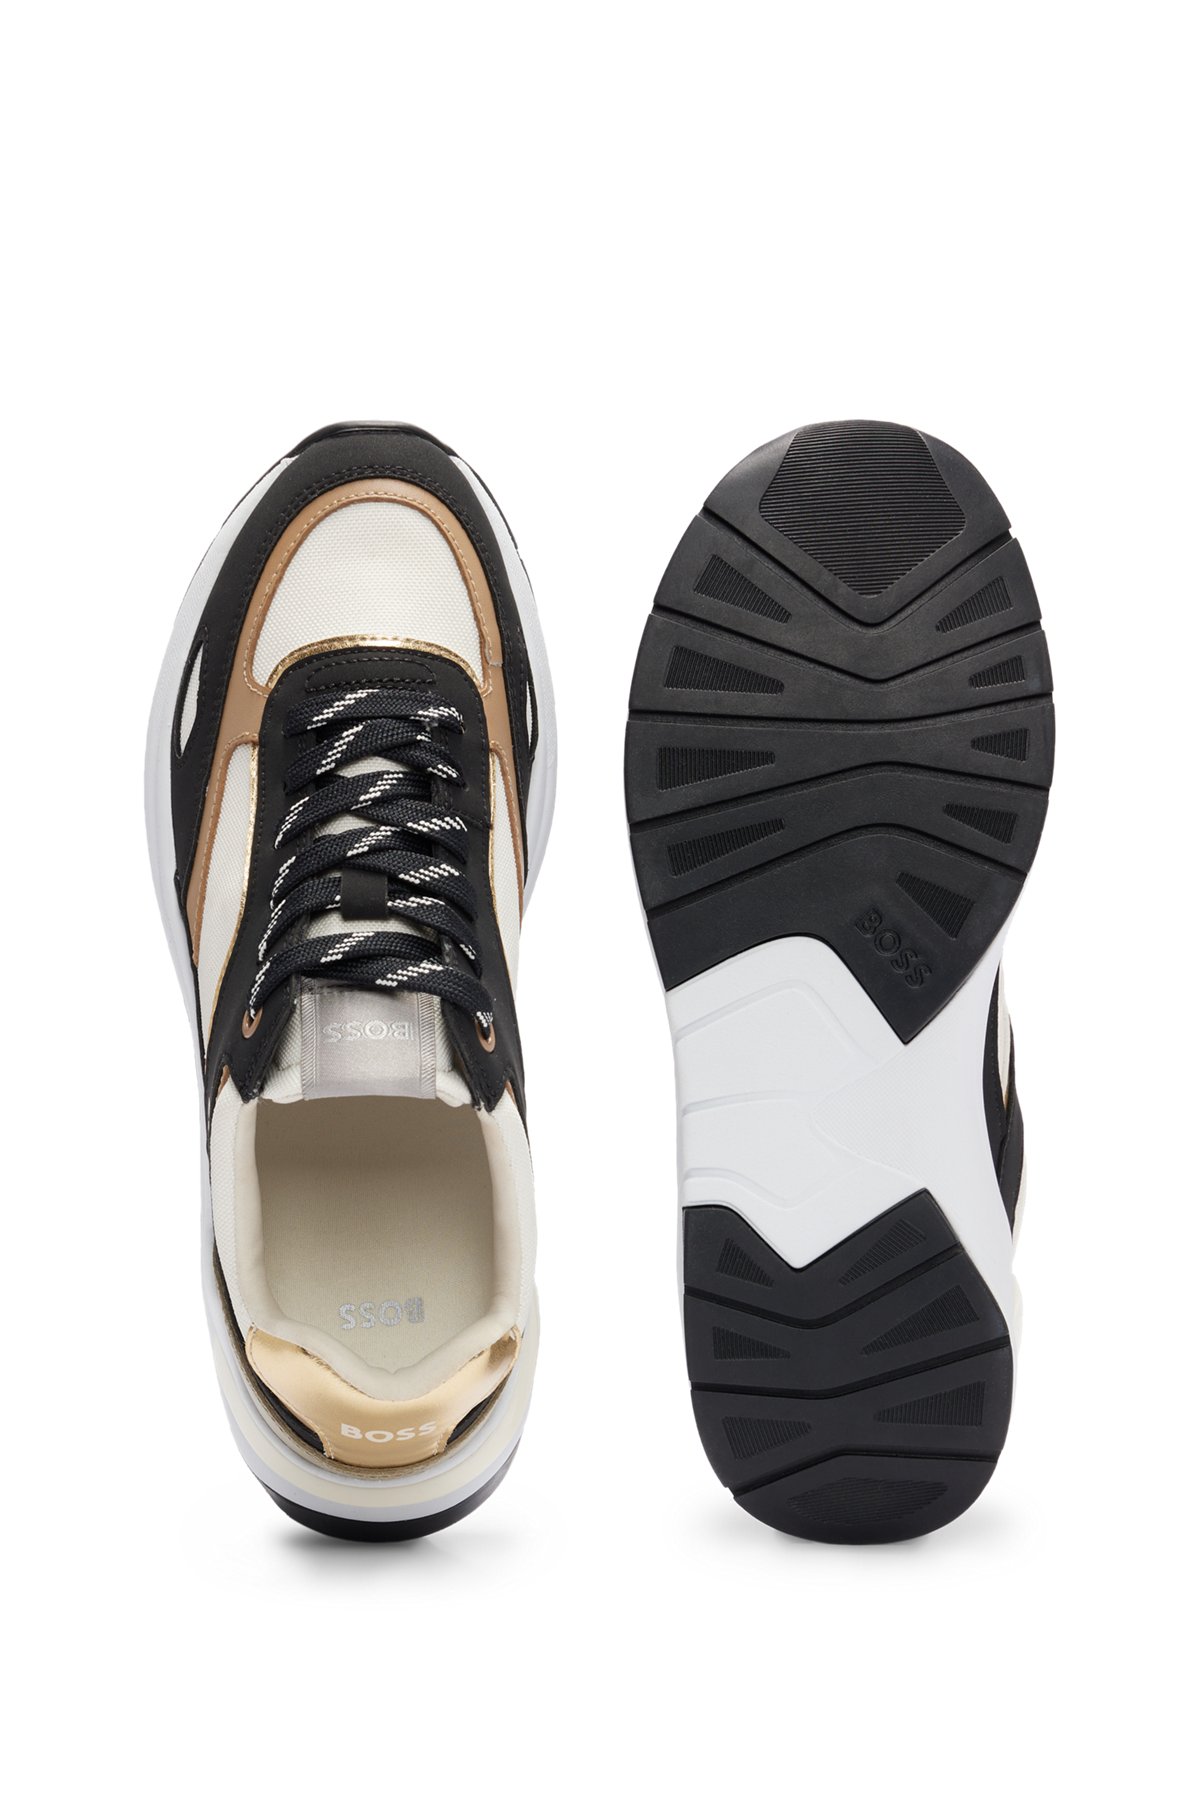 Mixed-material trainers with metallic details, Black